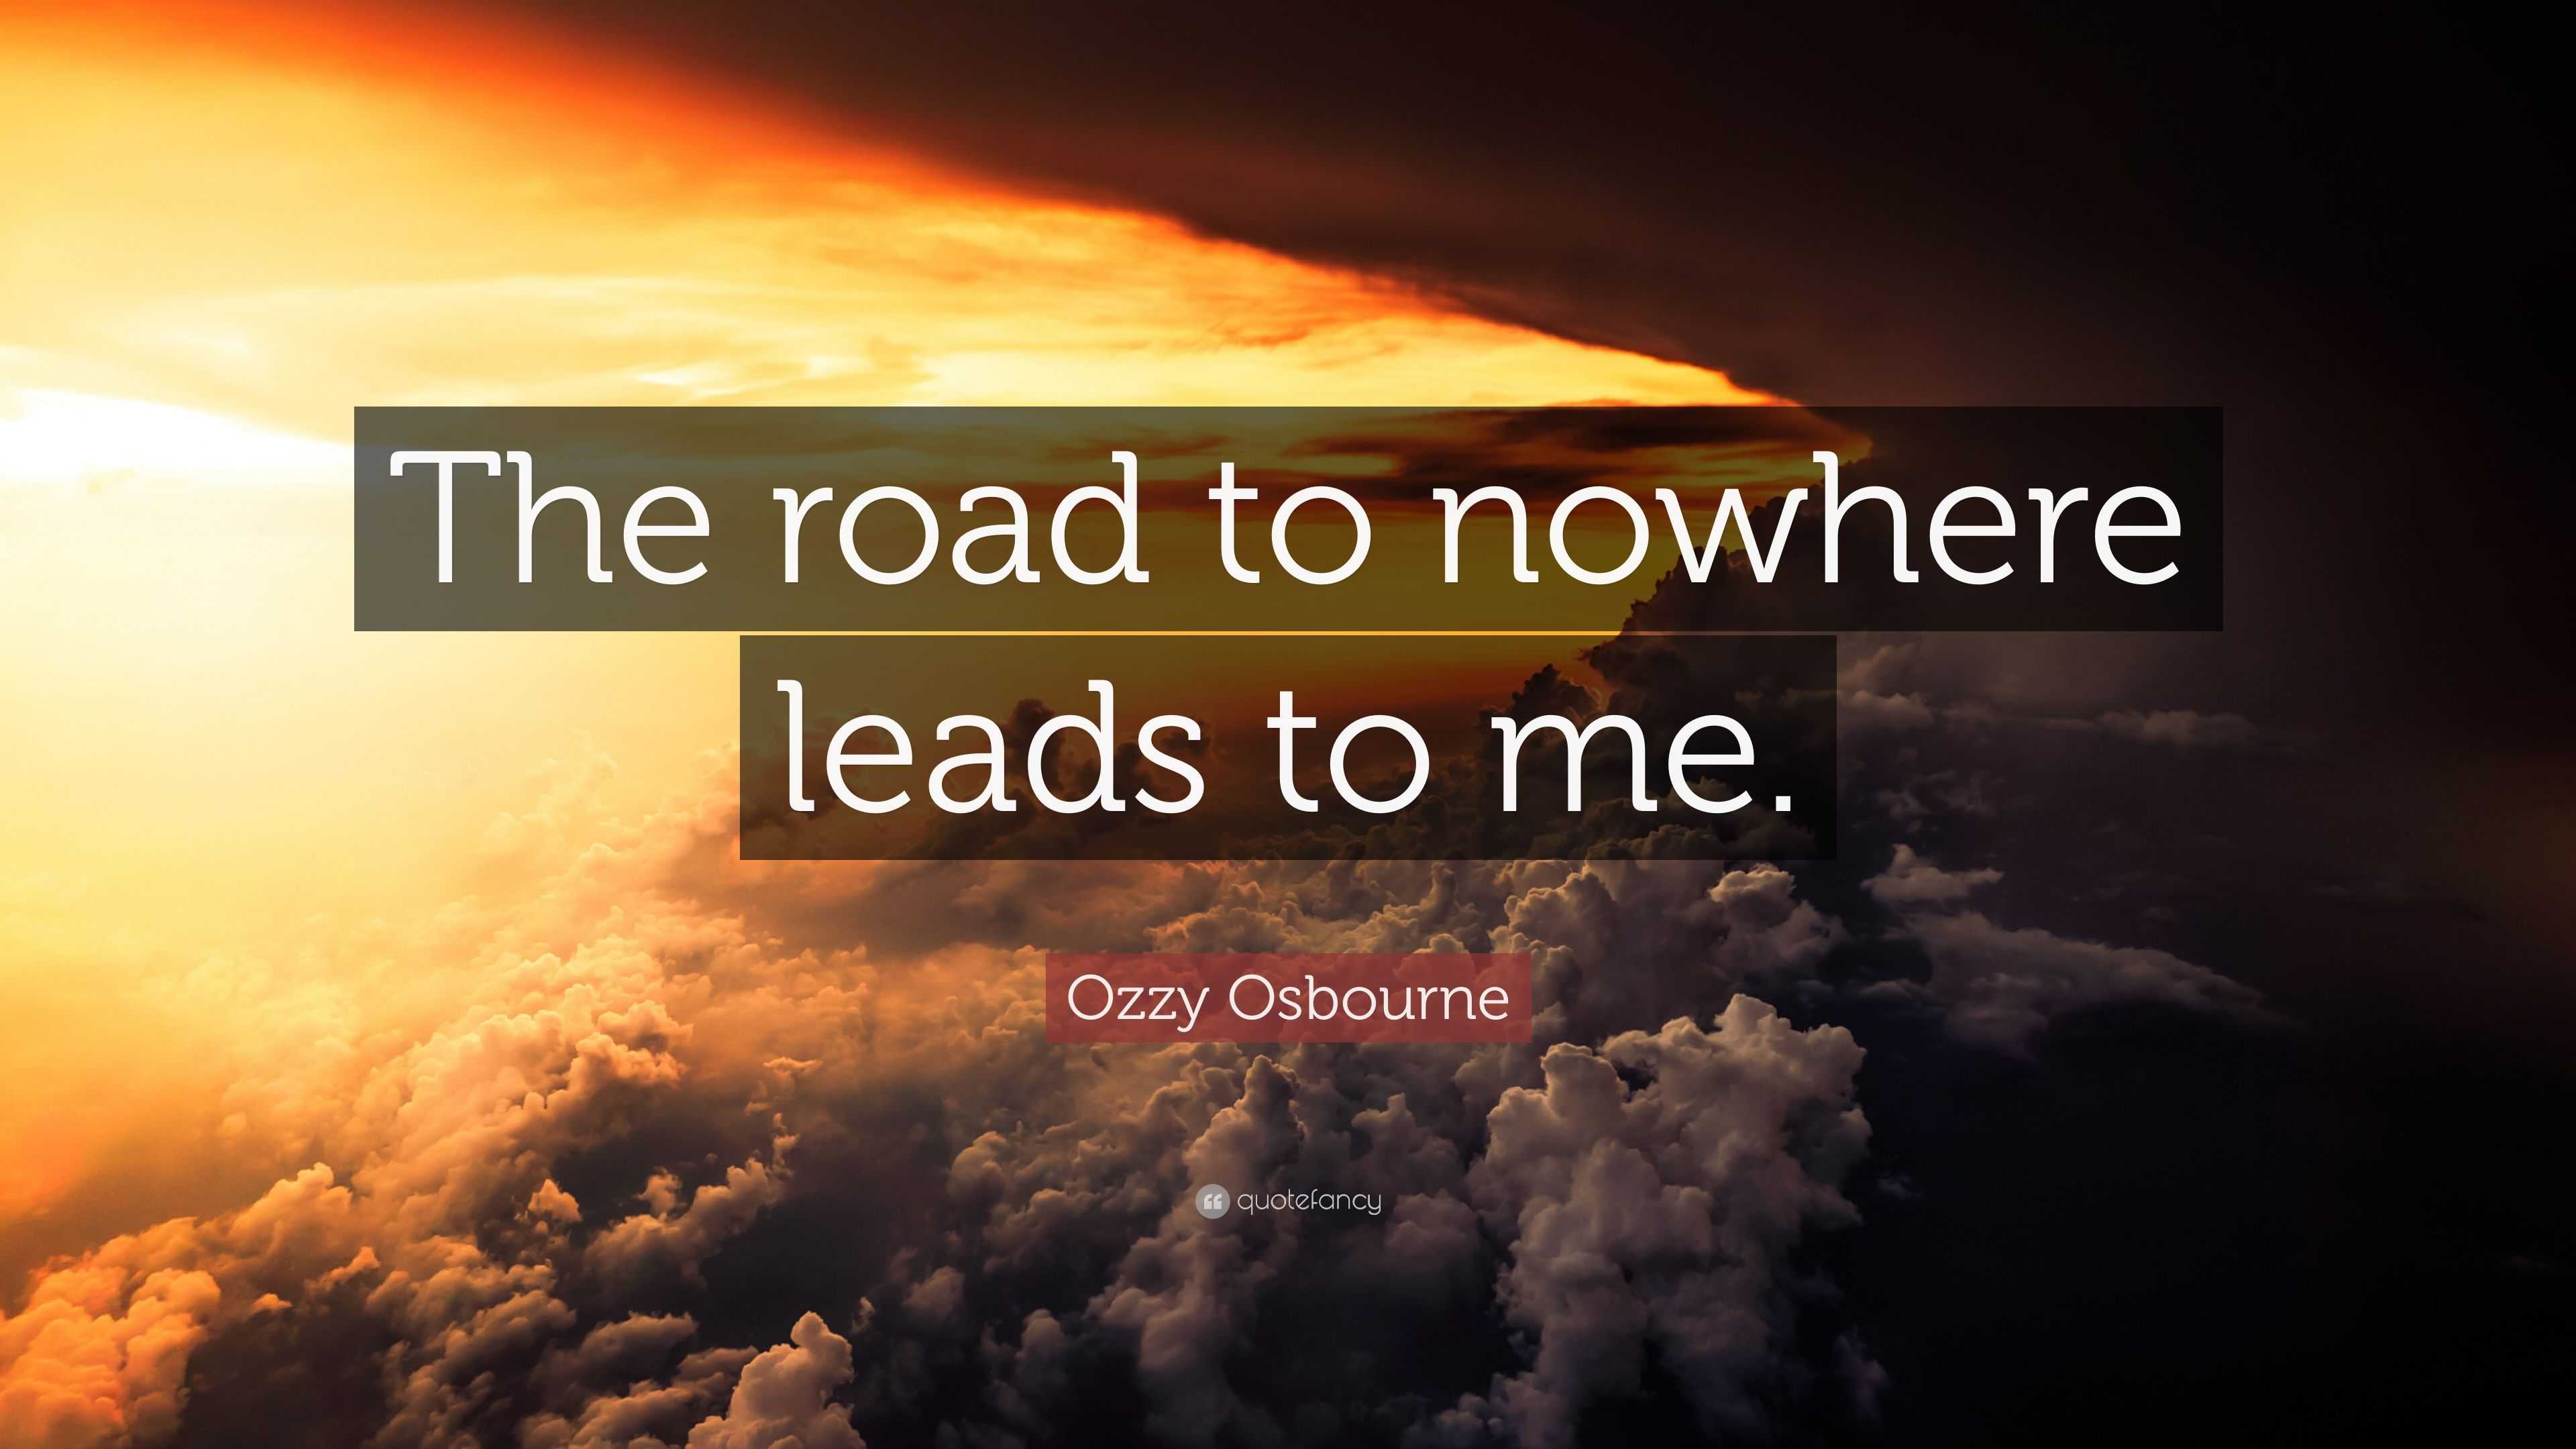 road to nowhere ozzy osbourne soundcloud